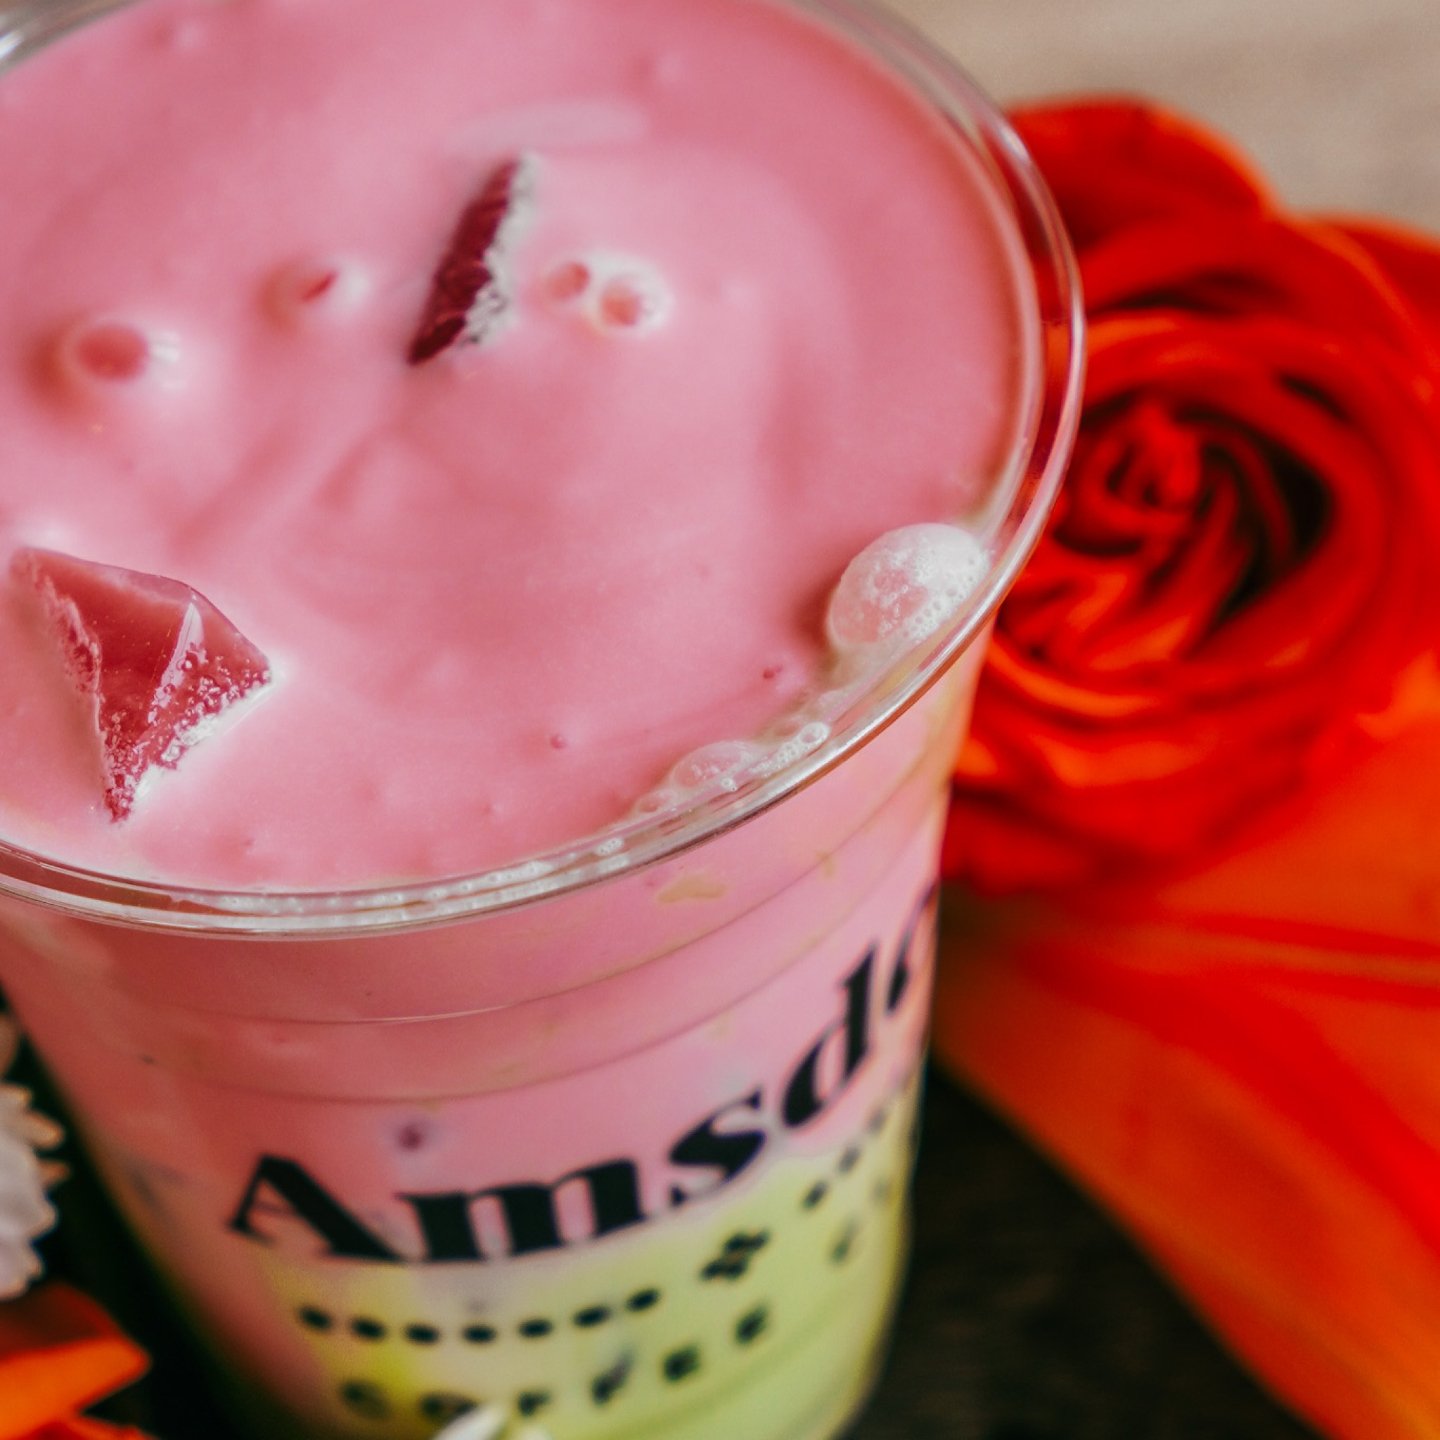 🍓💚 Get ready to matcha-make your day! Our Strawberry Matcha Latte is here to add some berrylicious vibes to your Tuesday! 🎉✨ Sip, smile, and seize the day with this fruity and fabulous drink! Who's up for a matcha made in heaven? 🌟 

#theamsden #